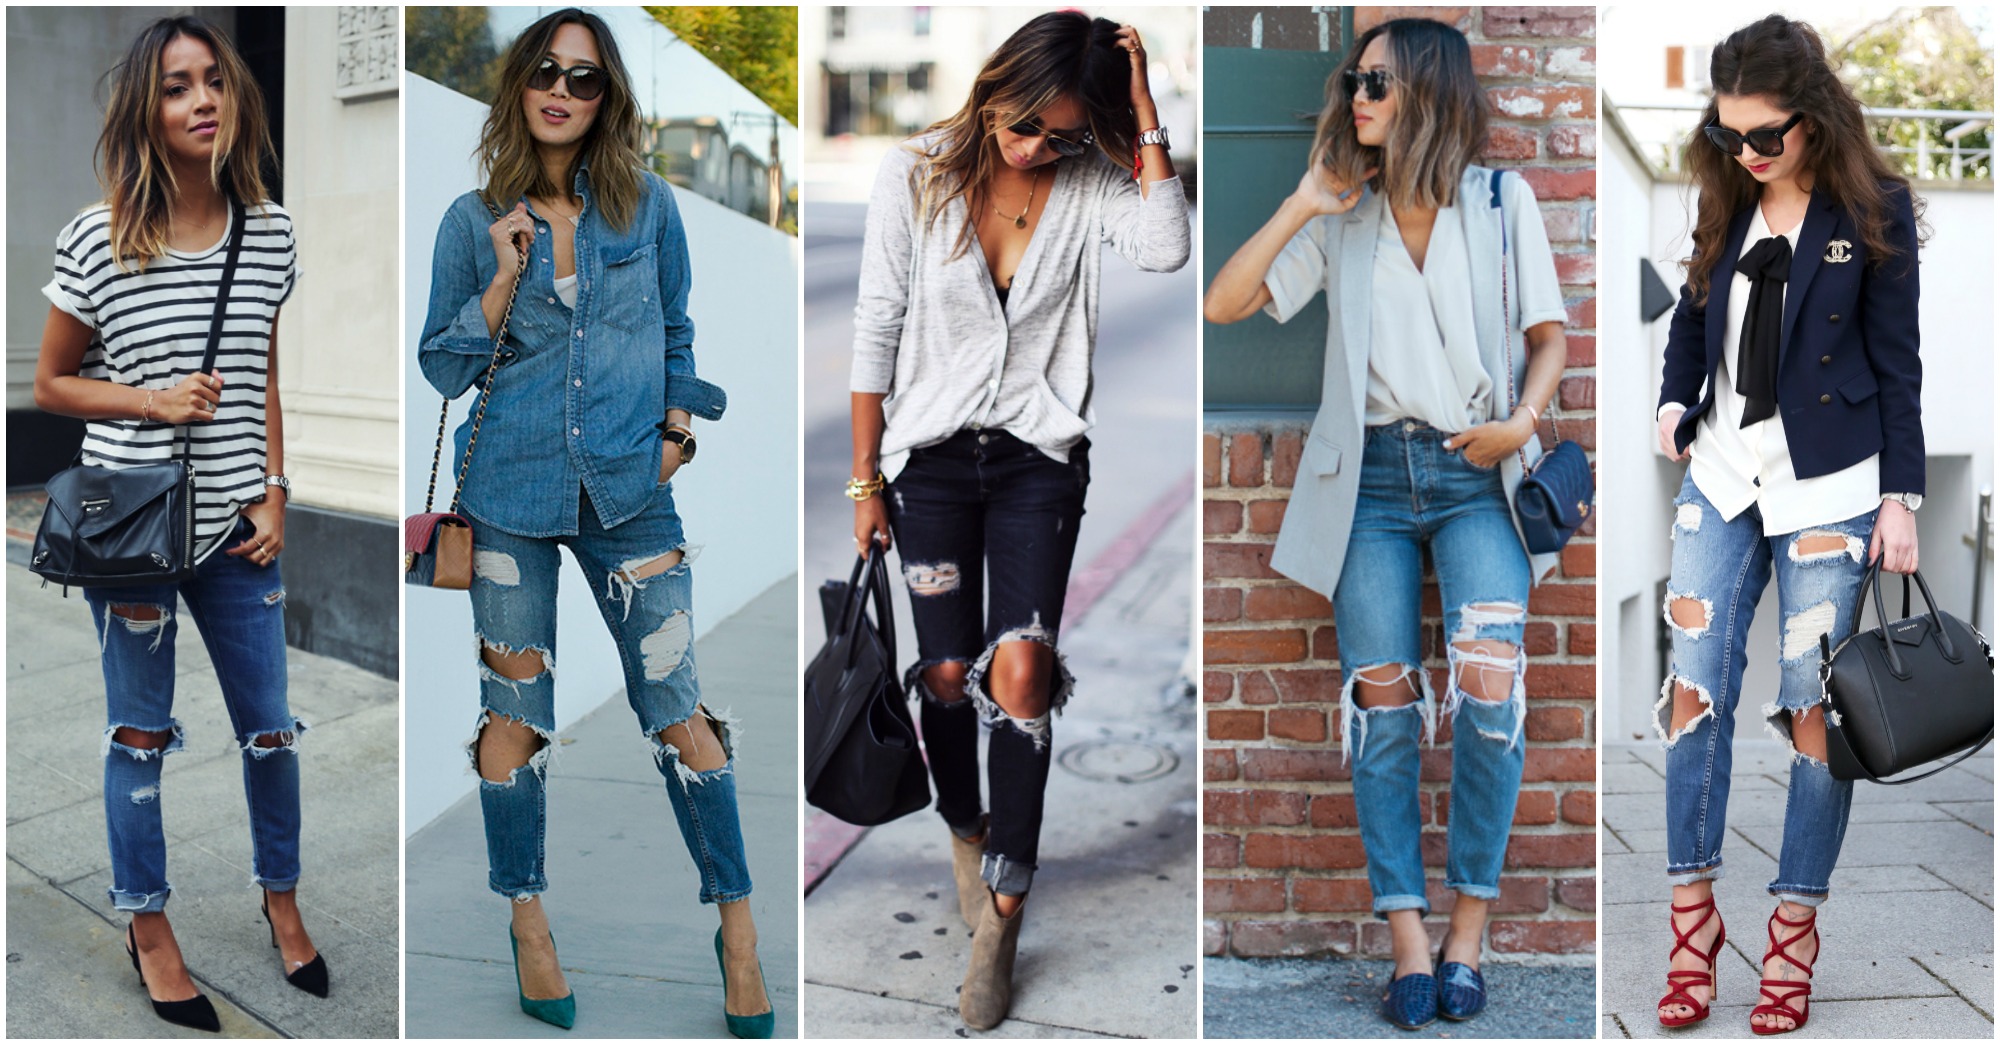 Outstanding Street Style Combinations with Ripped Jeans